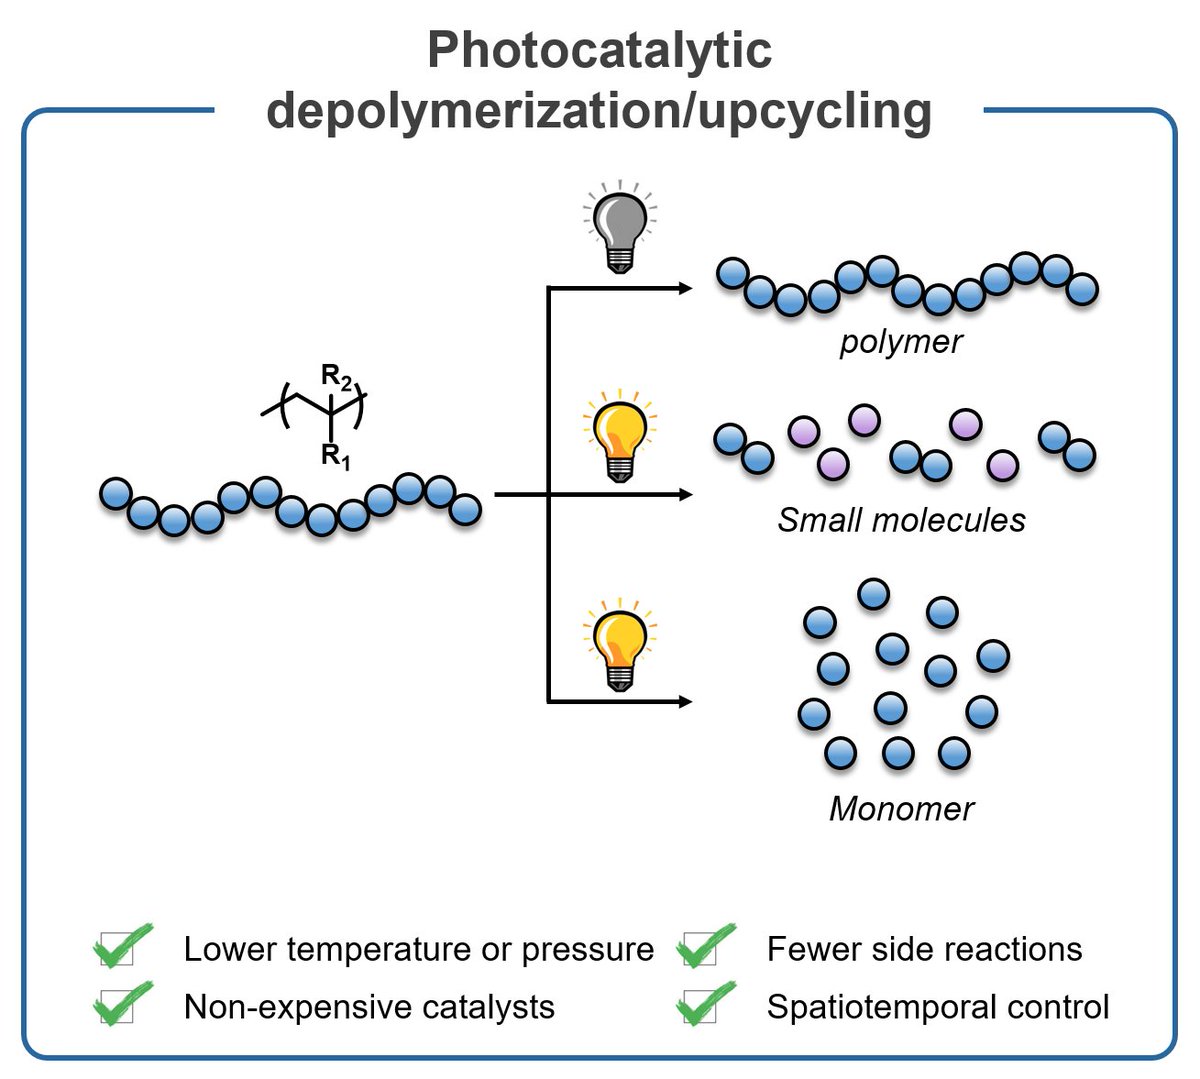 Two in two days! Photocatalytic Upcycling and Depolymerization of Vinyl Polymers @angew_chem! This Mini-review discusses light-catalyzed strategies to deconstruct vinyl polymers. Congrats @kostaspark @HyunSukWang1 @AthinaAnastasa1! @ETH_Materials @ETH_en onlinelibrary.wiley.com/doi/10.1002/an…